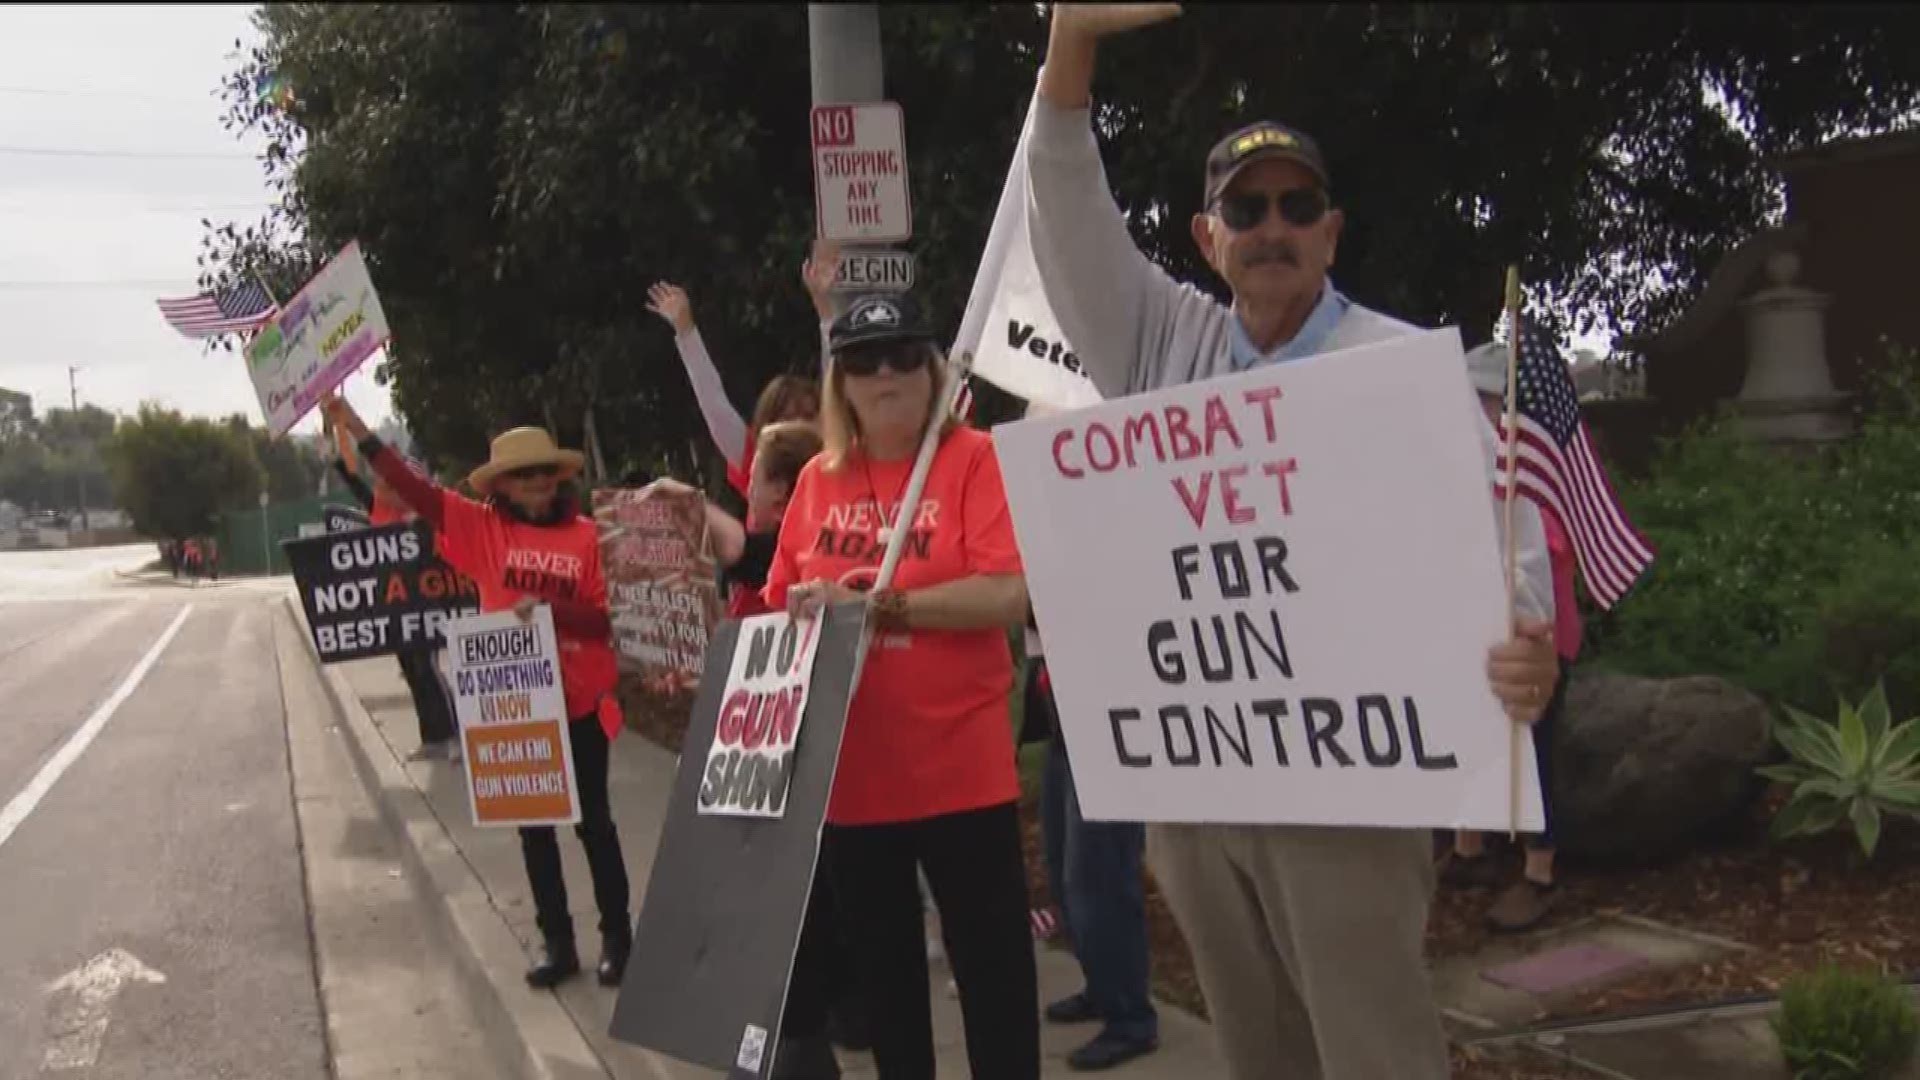 Protesters and counterprotesters alike came out to Del Mar came out to the controversial gun show.